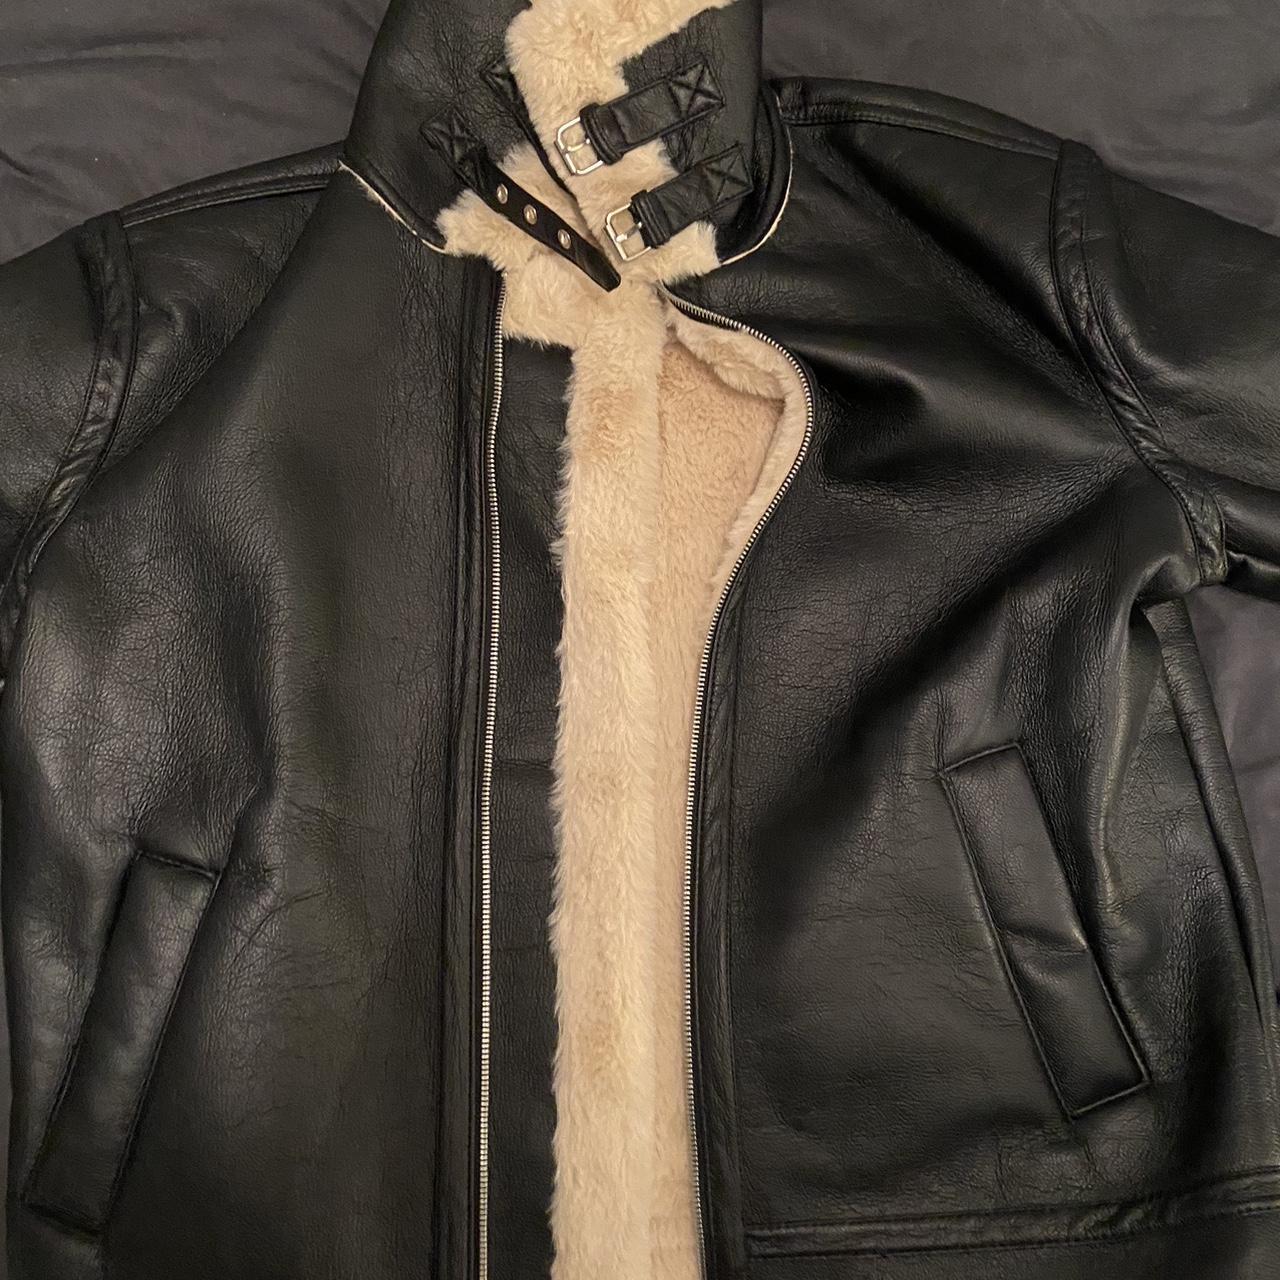 Black Faux Leather Aviator Jacket Bought for... - Depop